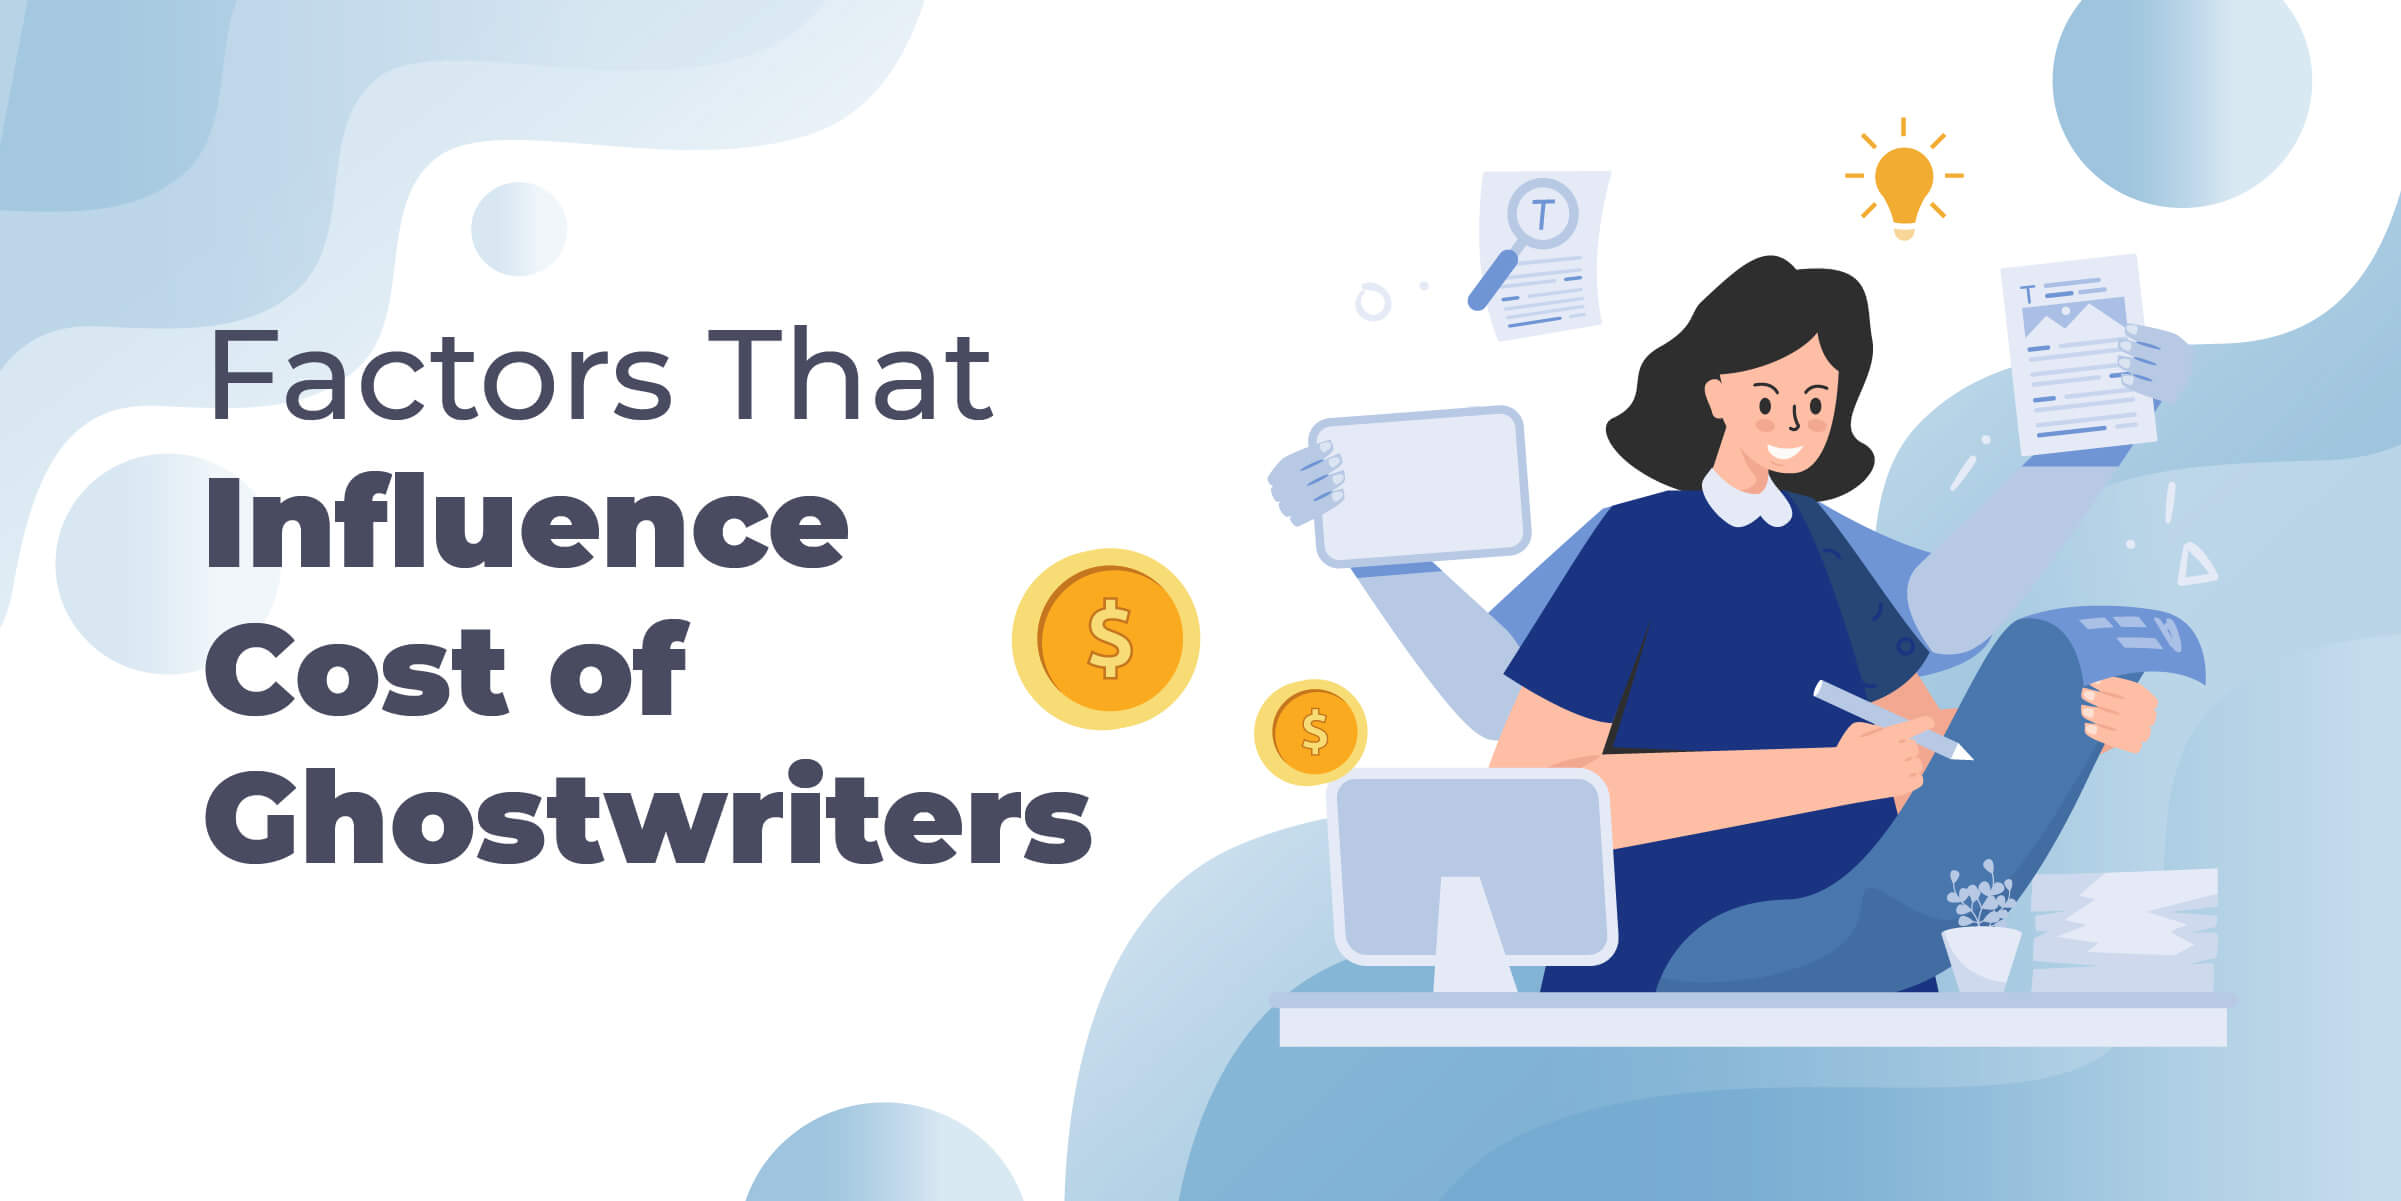 Factors That Influence Cost of Ghostwriters